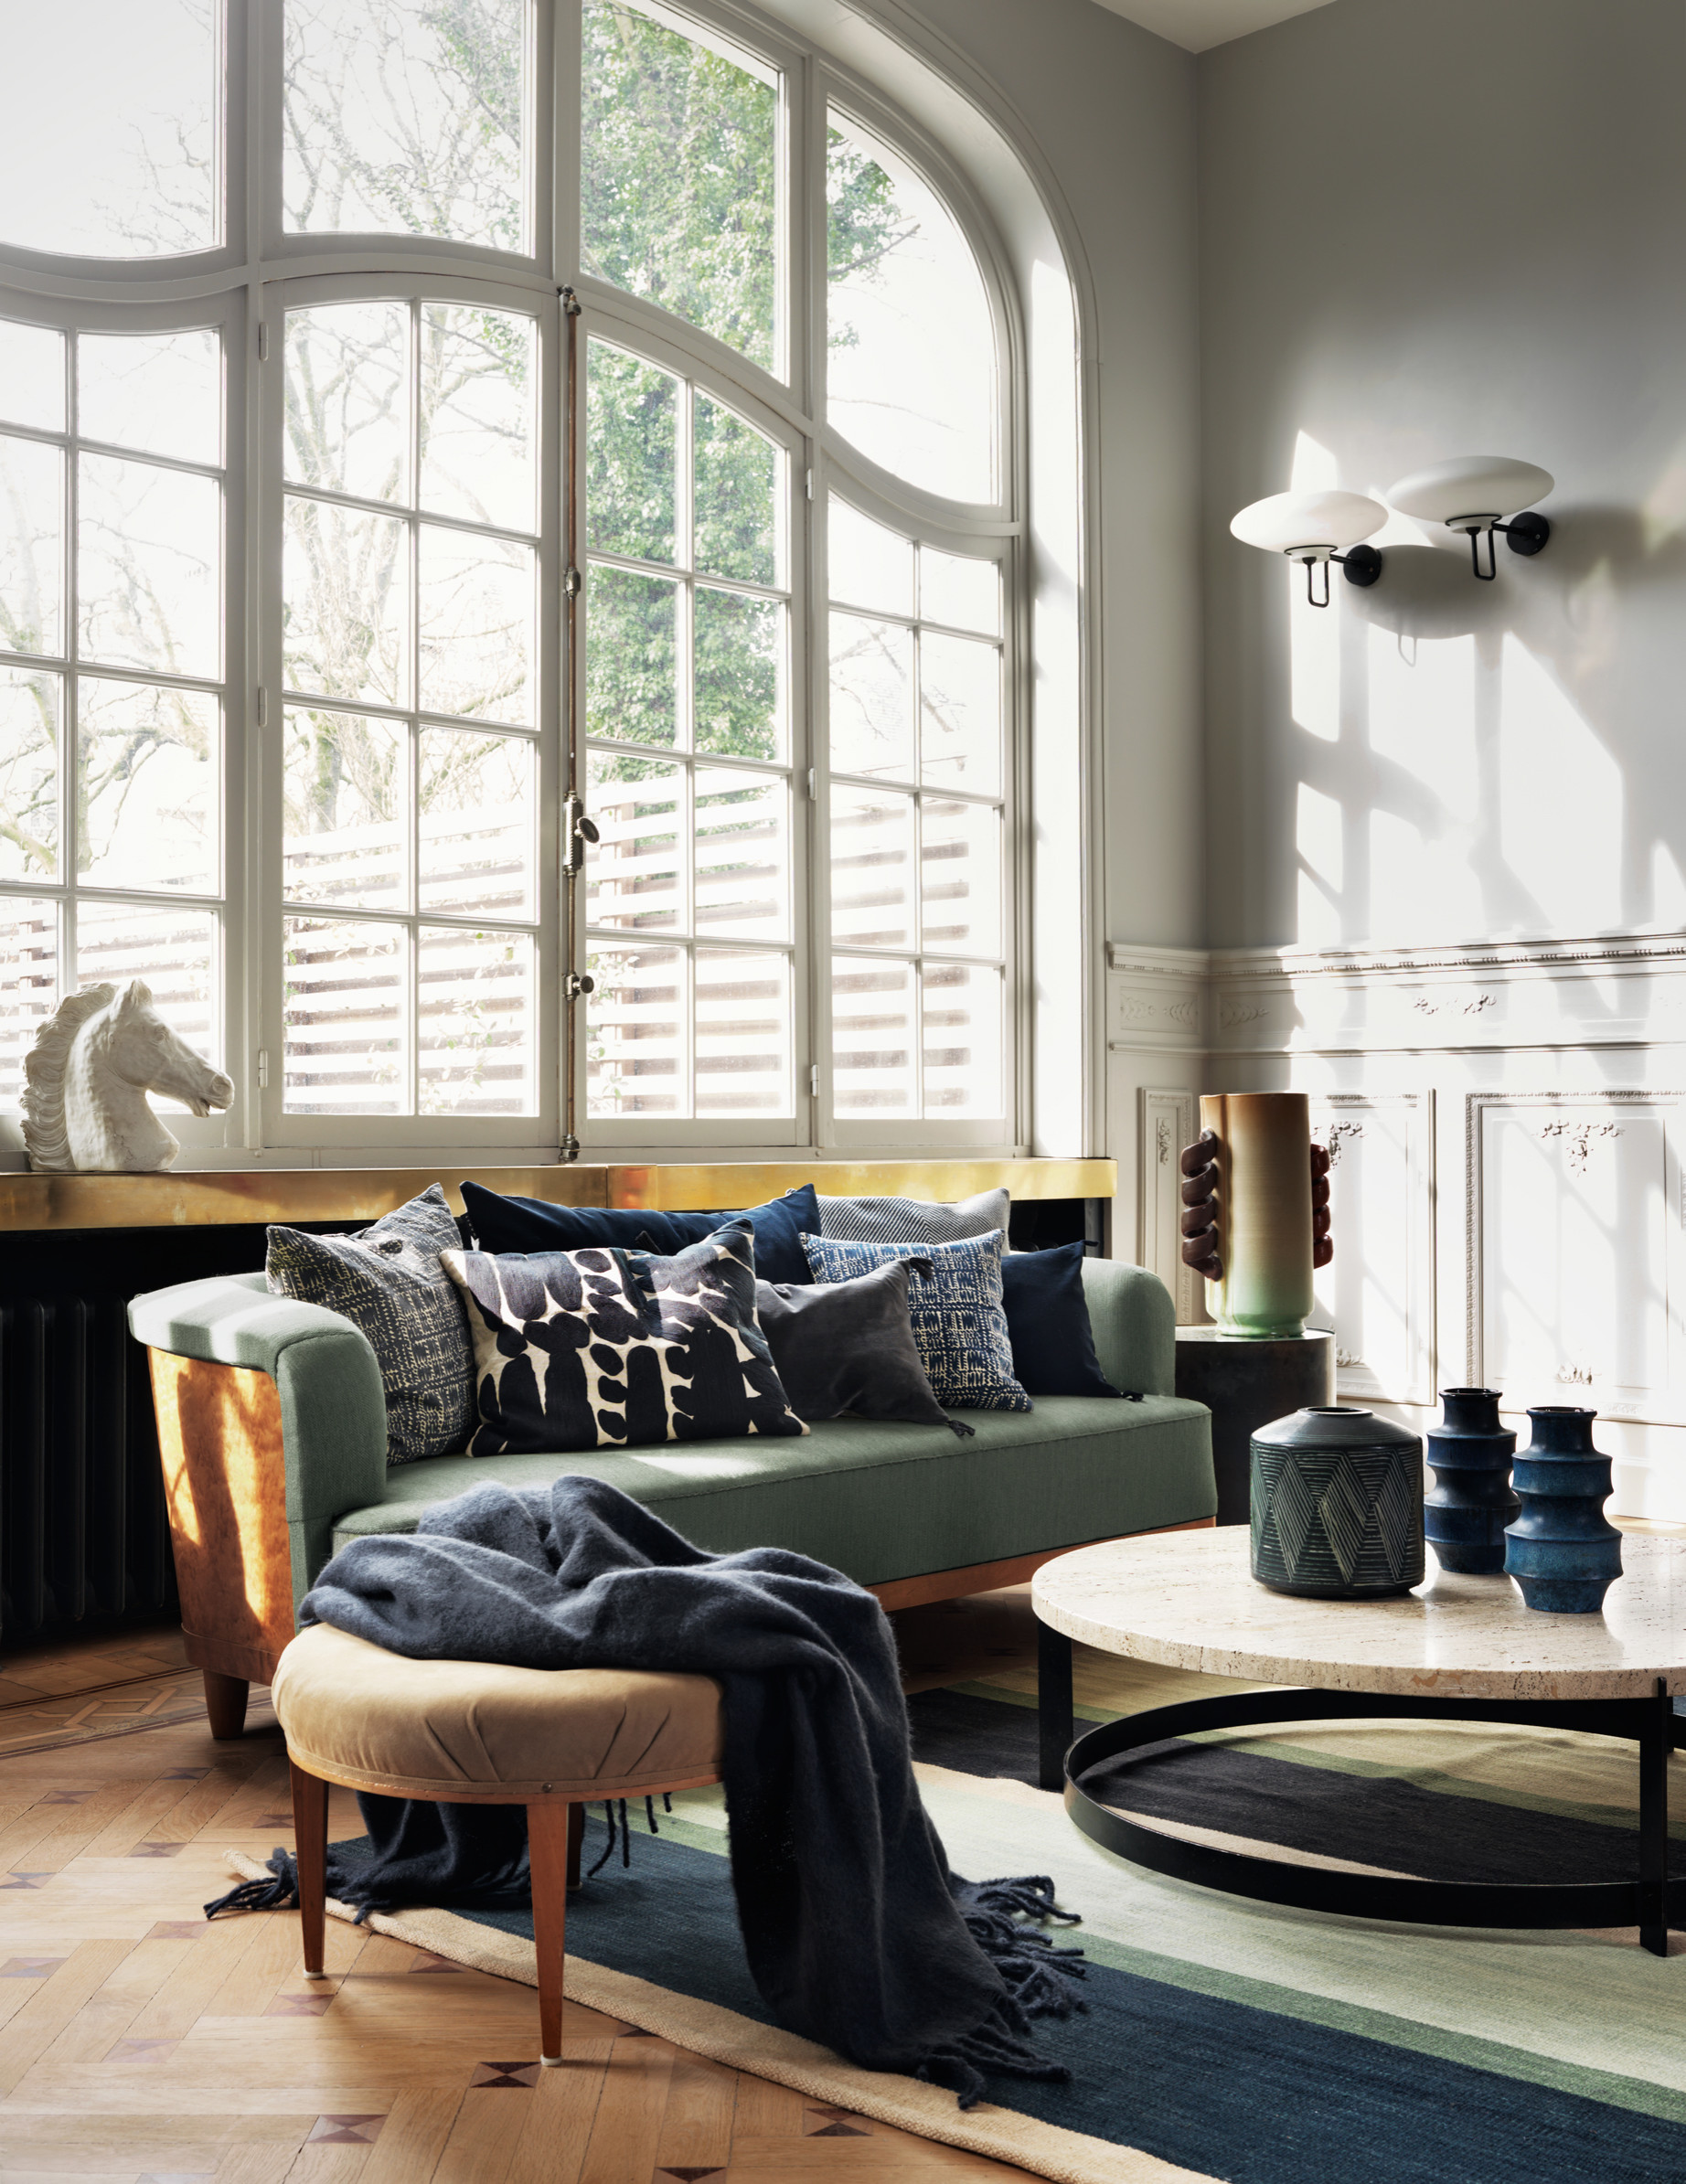 High ceiling living room - Eclectic - Living Room - Stockholm - by Dusty  Deco | Houzz